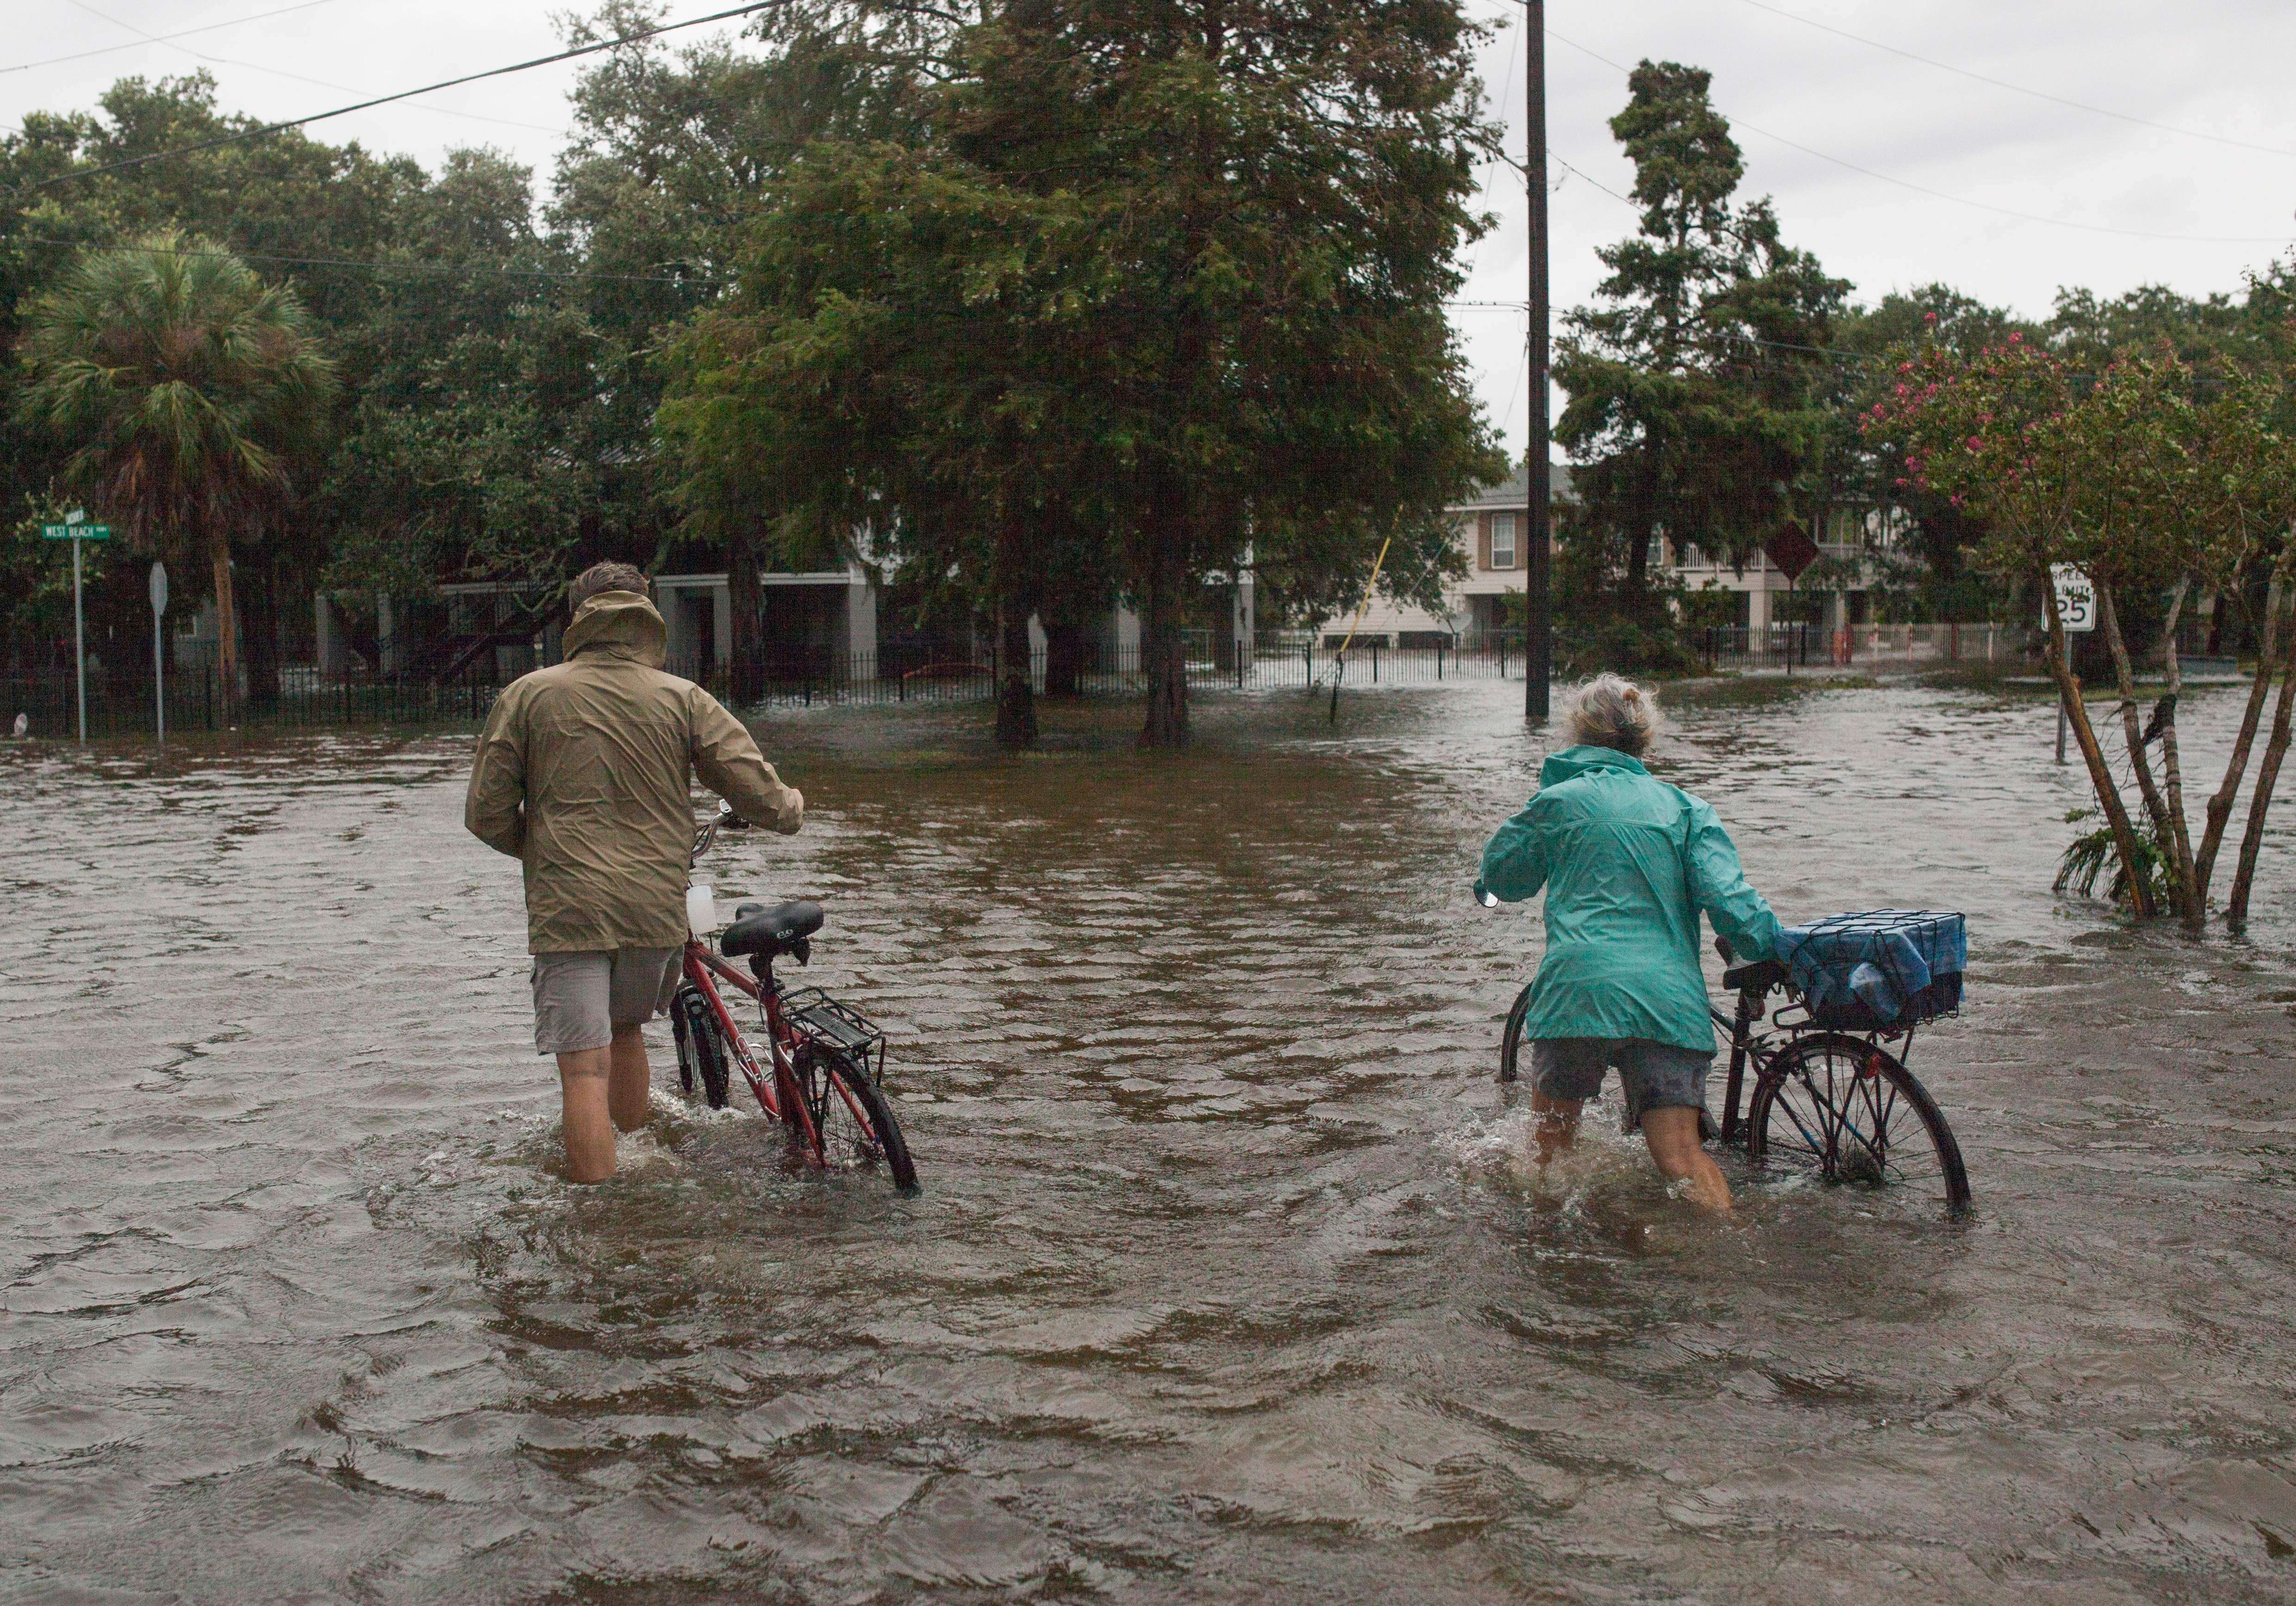  A couple walks their bikes through a flooded street after Tropical Storm Barry came ashore in Mandeville, Louisiana.